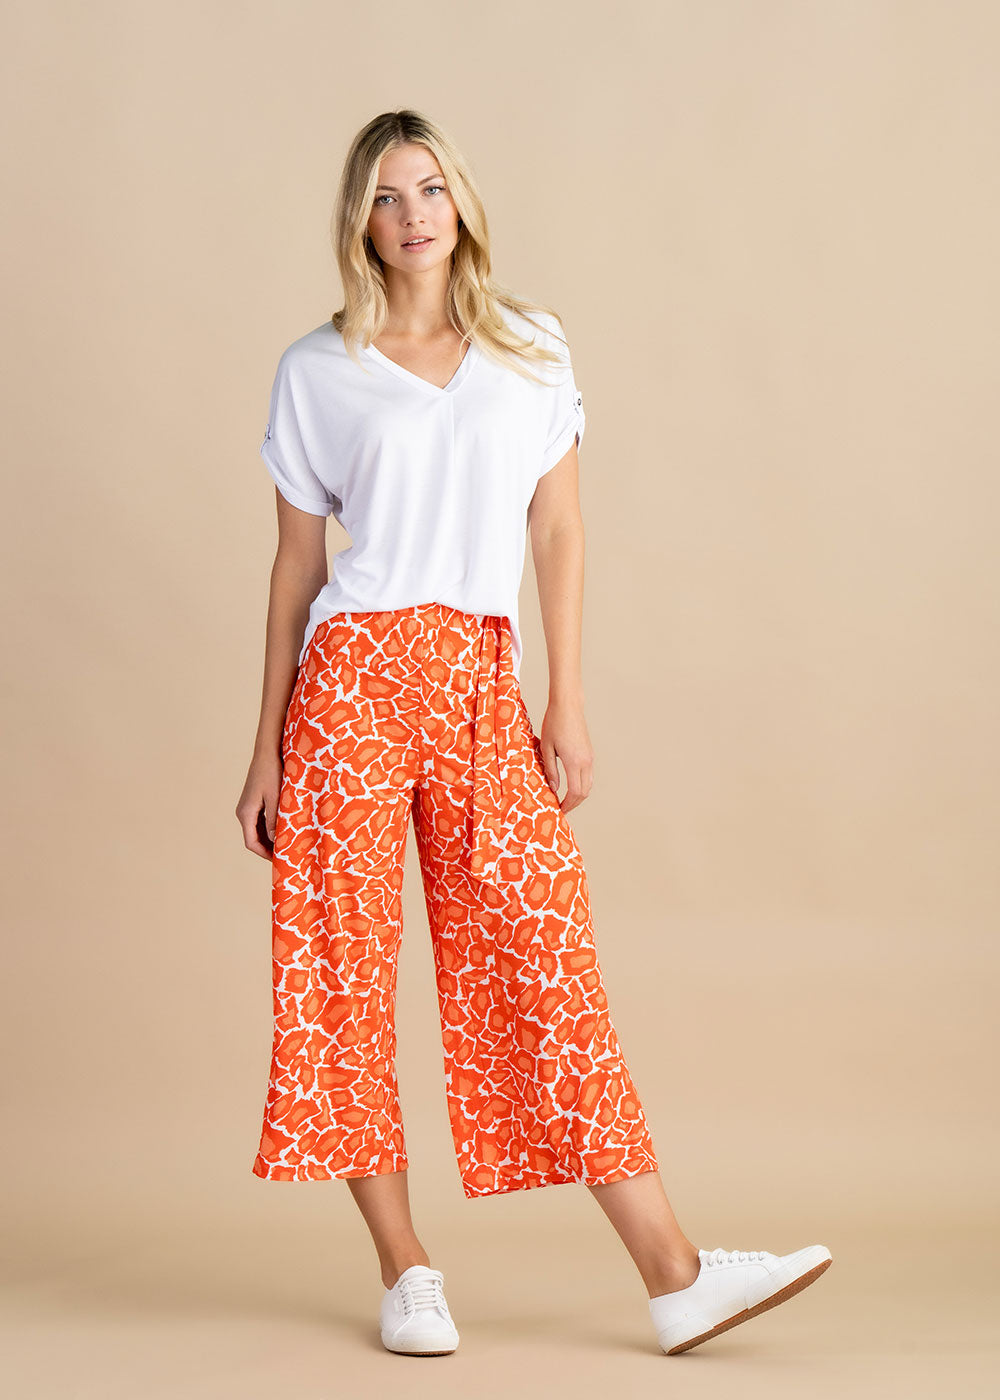 Marble Print Culottes